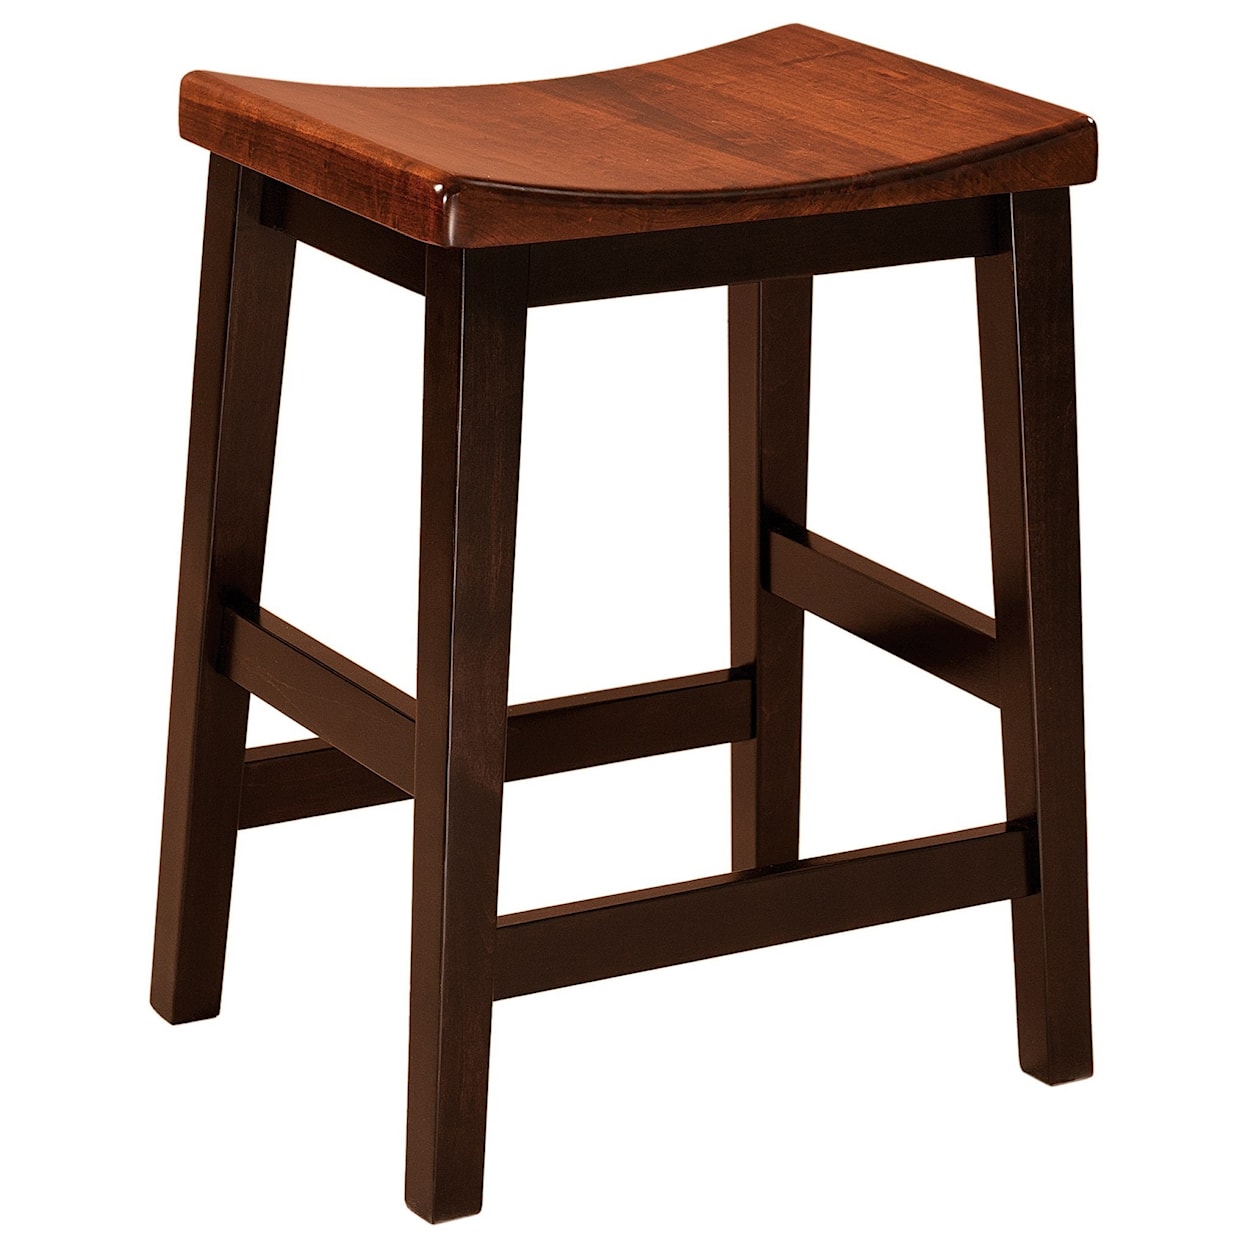 F&N Woodworking Coby Bar Stool 24" Height - Wood Seat